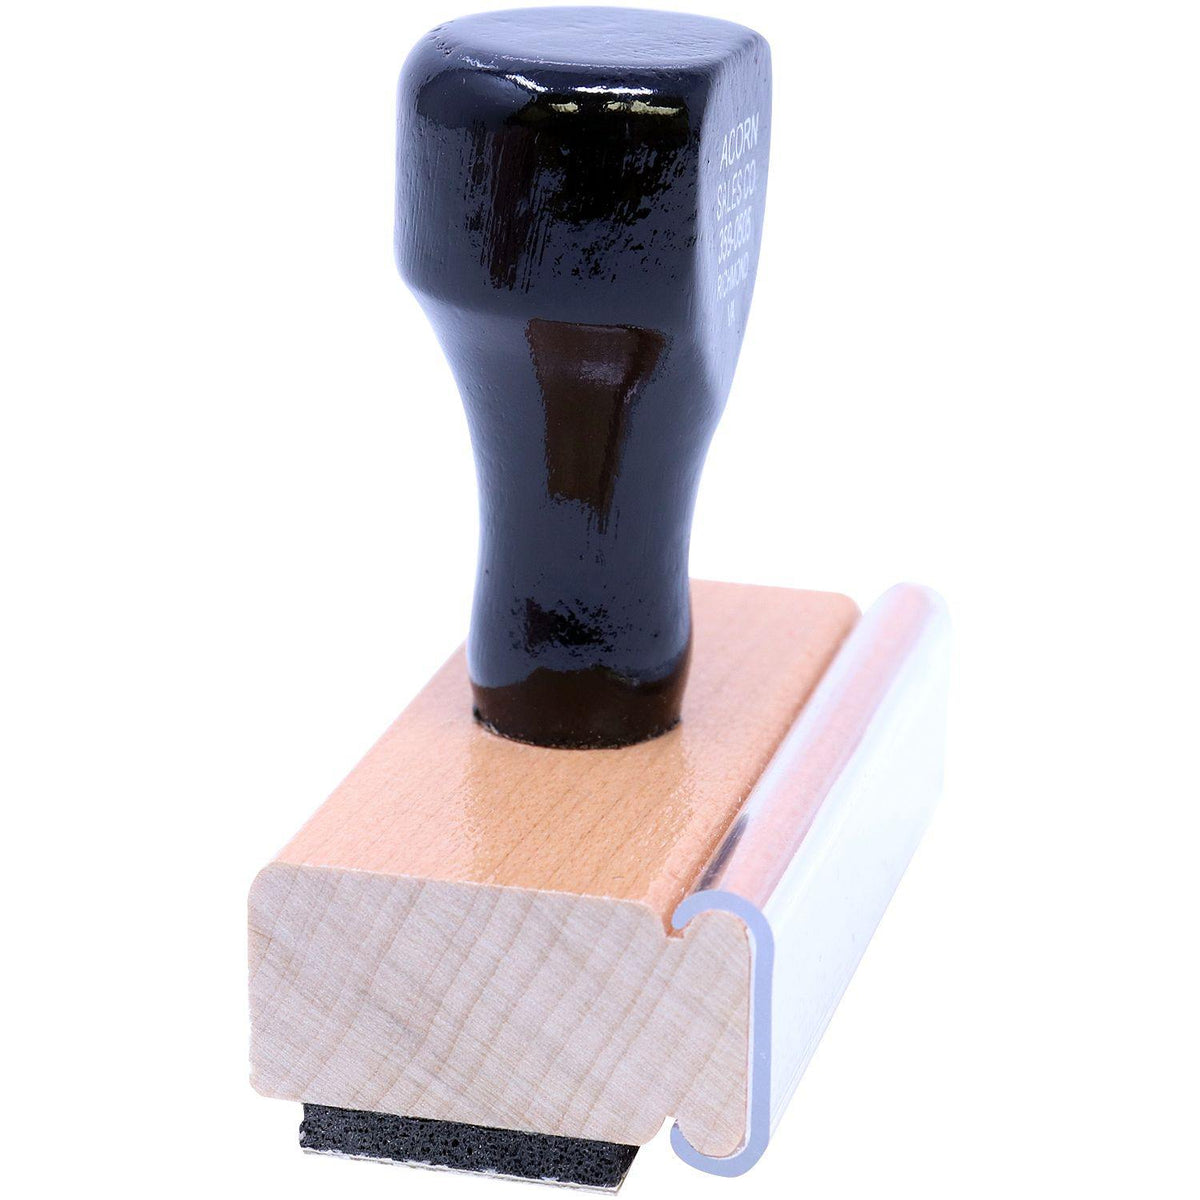 Side View of Large Plaintiffs Exhibit Rubber Stamp at an Angle